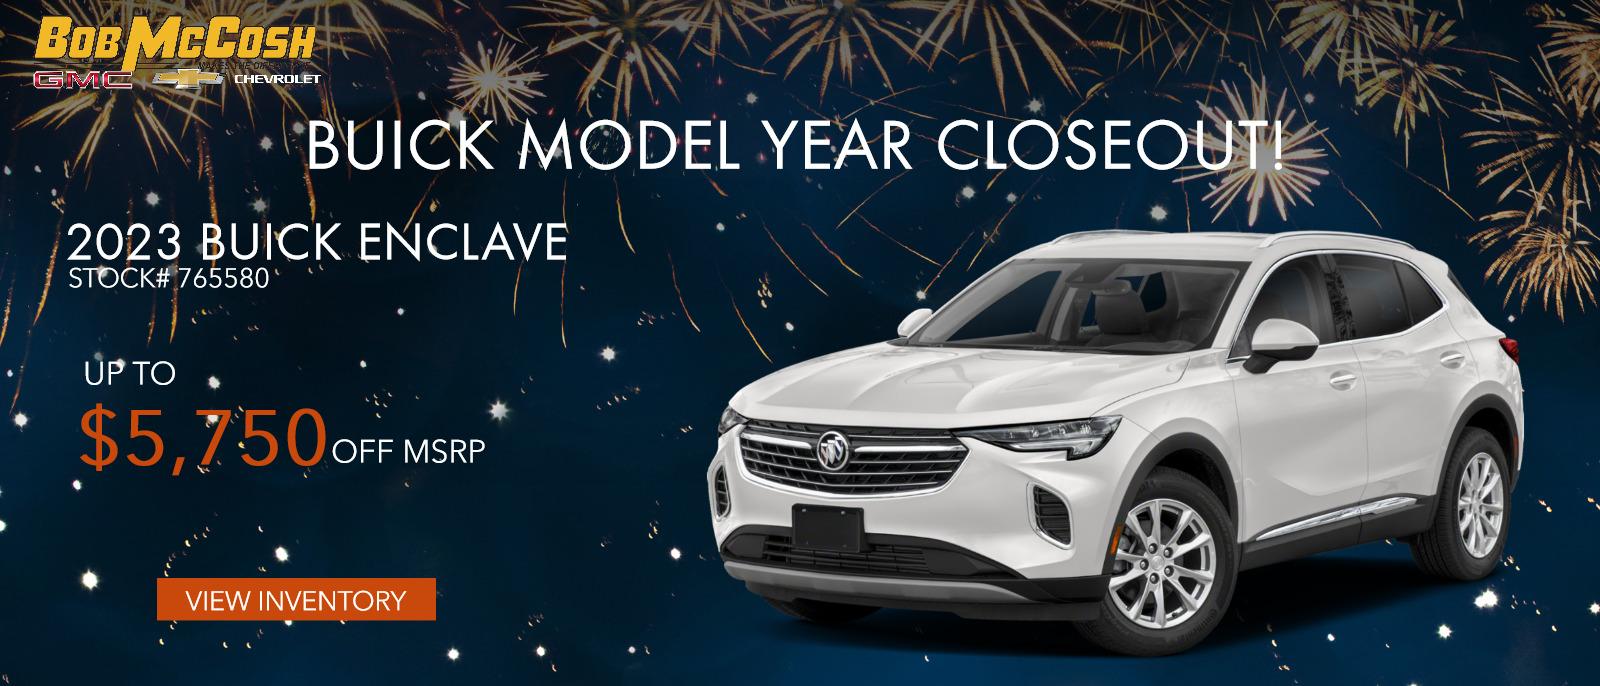 Buick Model Year Closeout!

2023 Buick Enclave - Up to $5750 OFF MSRP
Stock# 765580